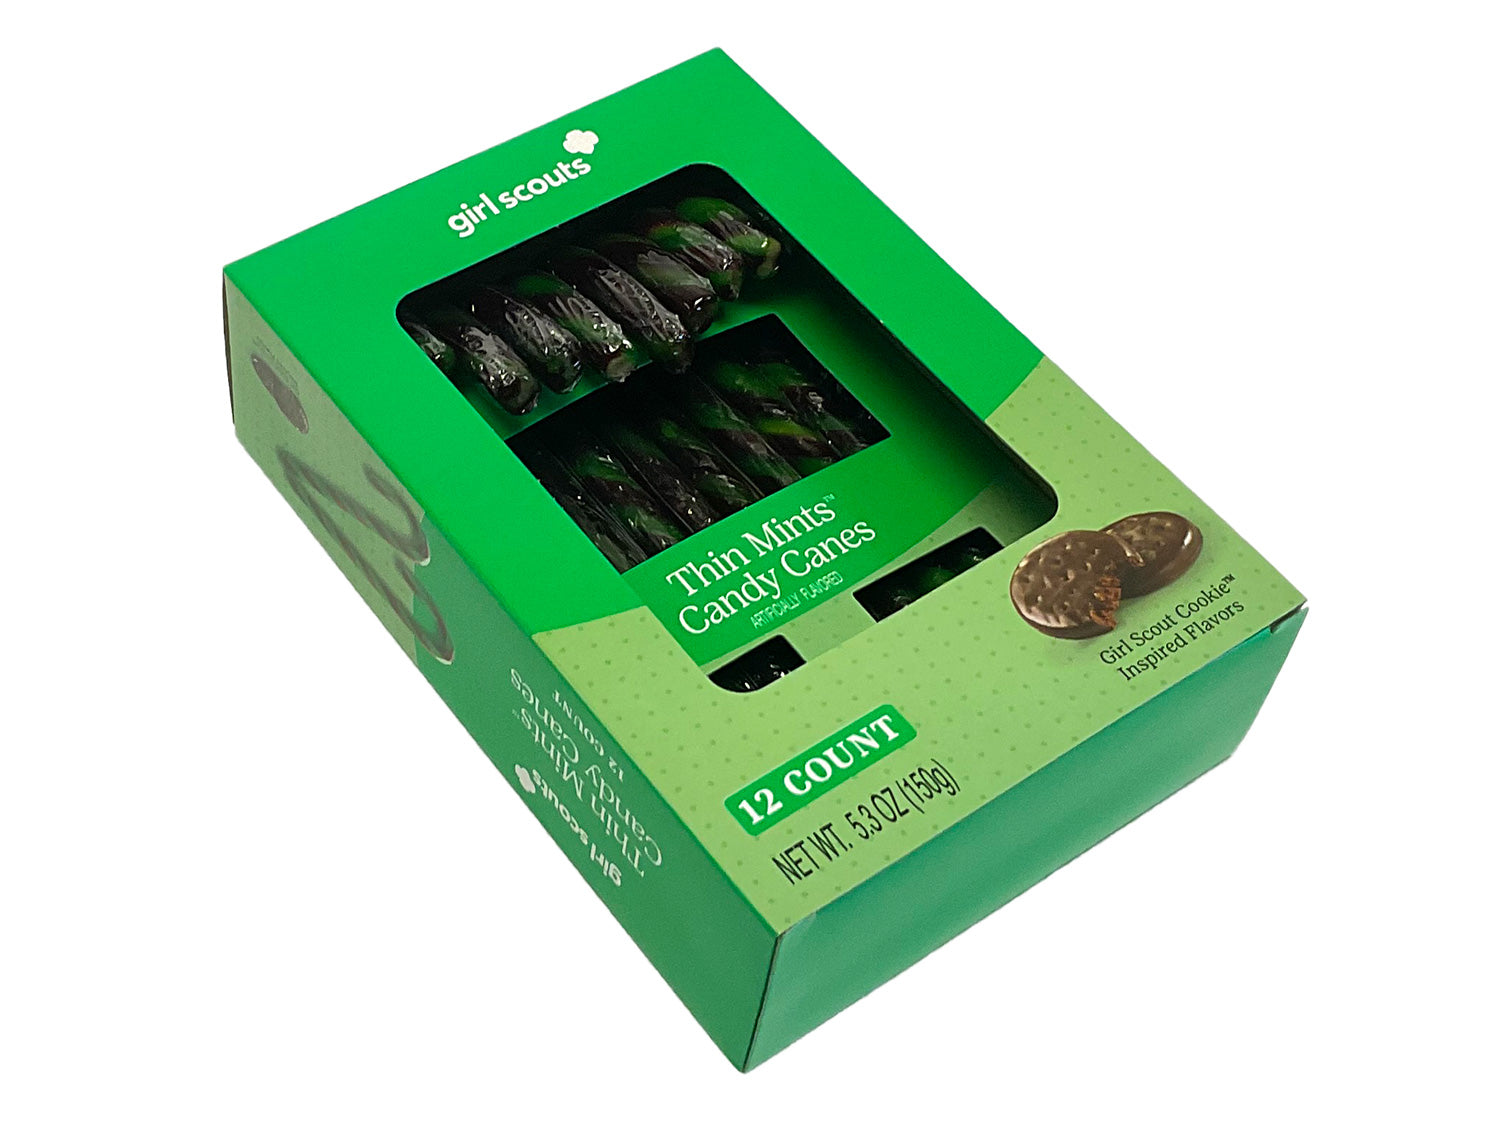 Candy Canes - Girl Scout's Thin Mints - 5.3 oz box